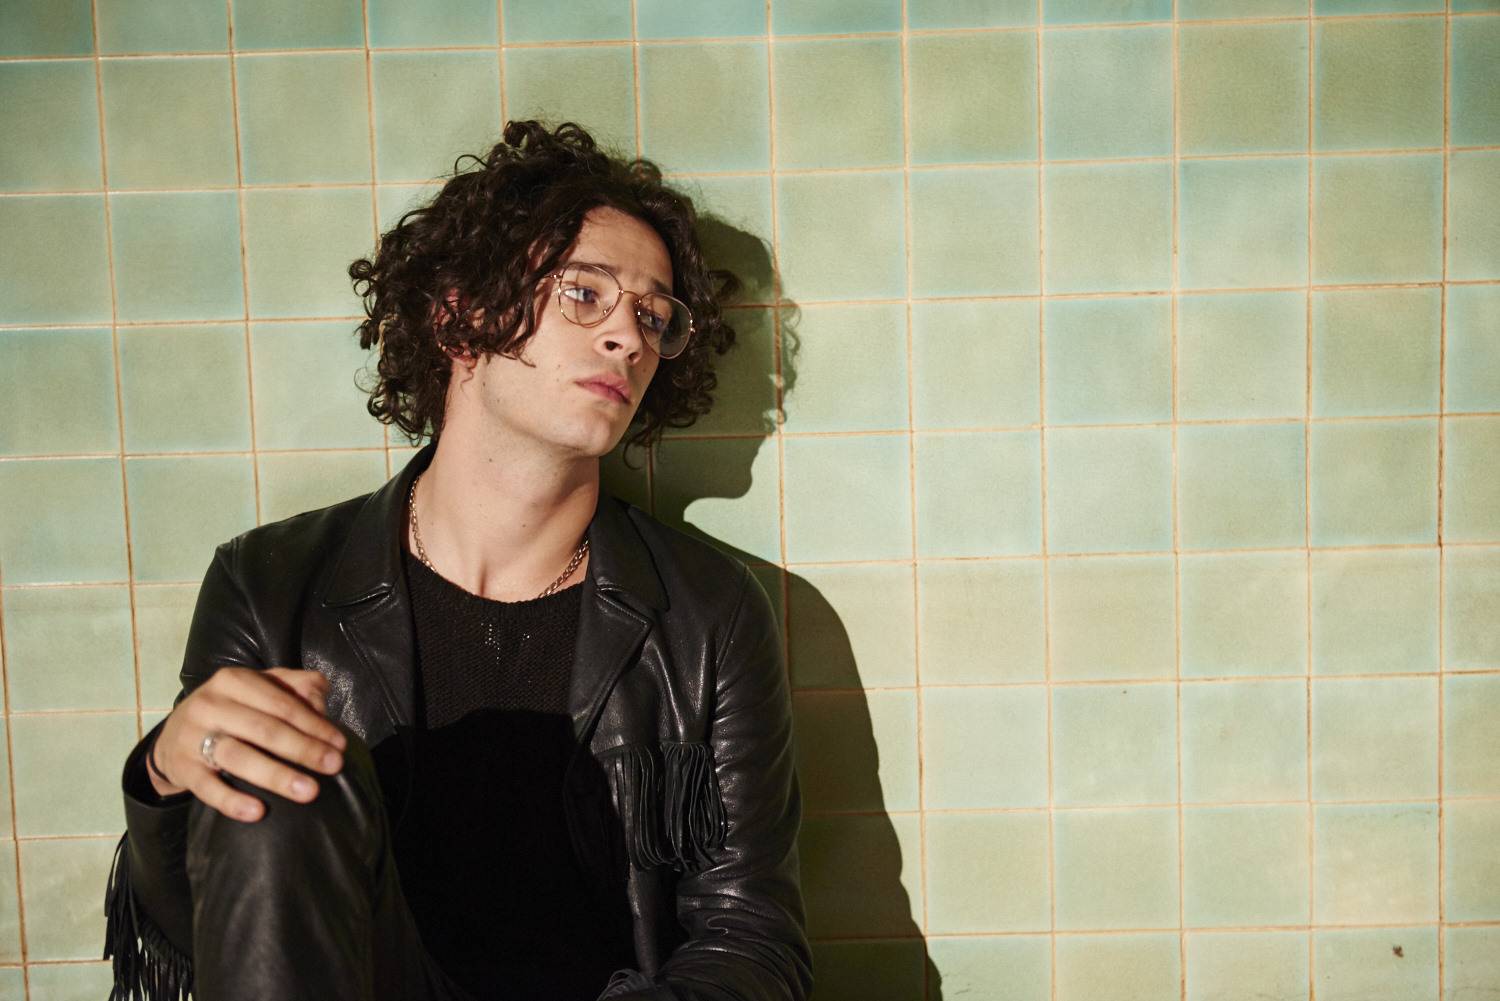 Matt Healy, frontman and lead vocalist of The 1975